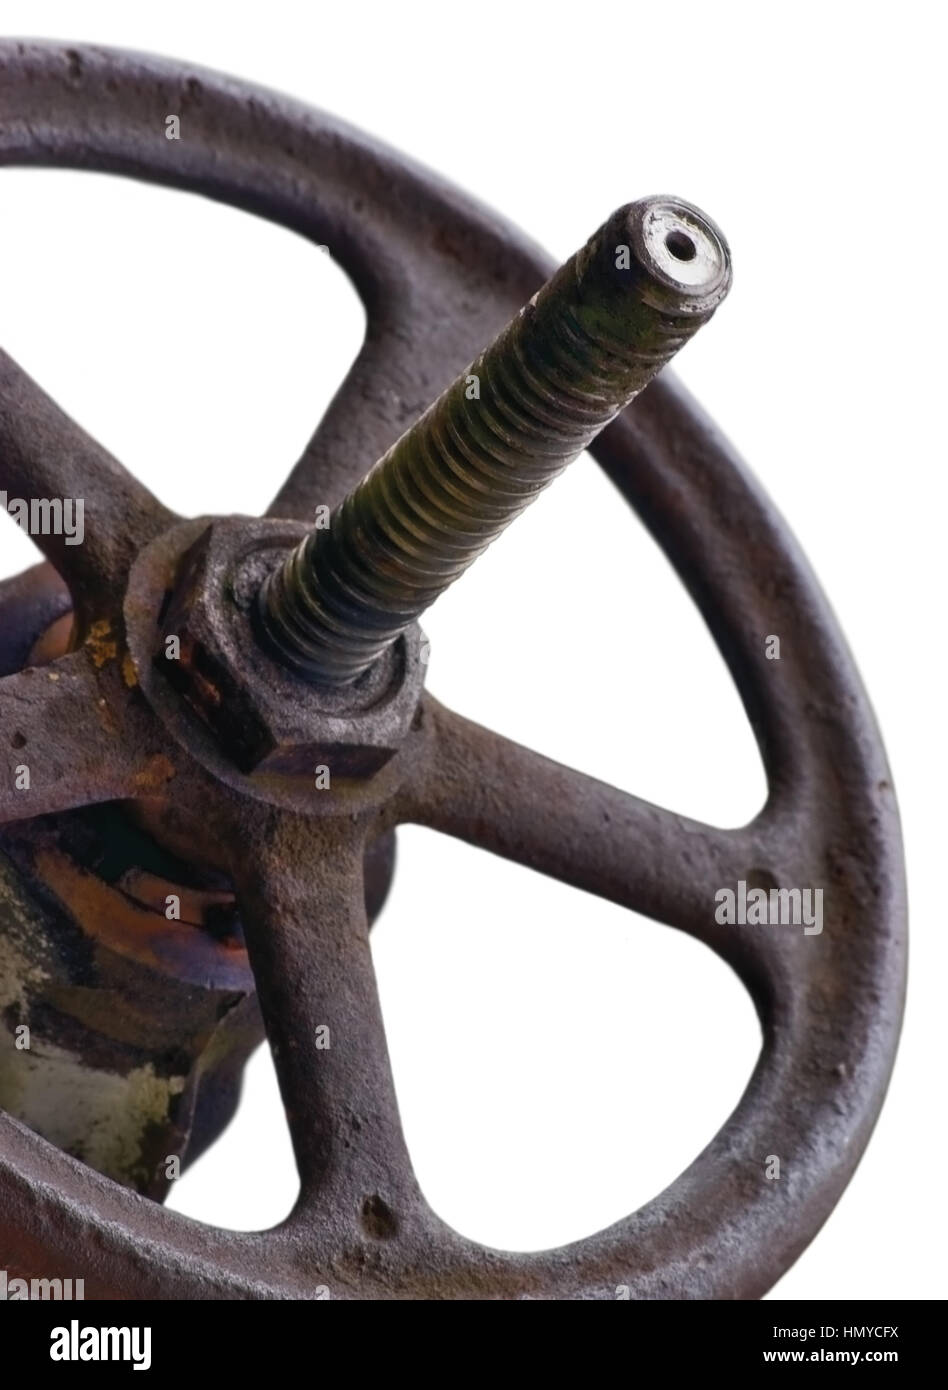 Industrial Valve Wheel And Stem, Old Aged Weathered Rusty Grunge Latch Closeup Isolated Stock Photo